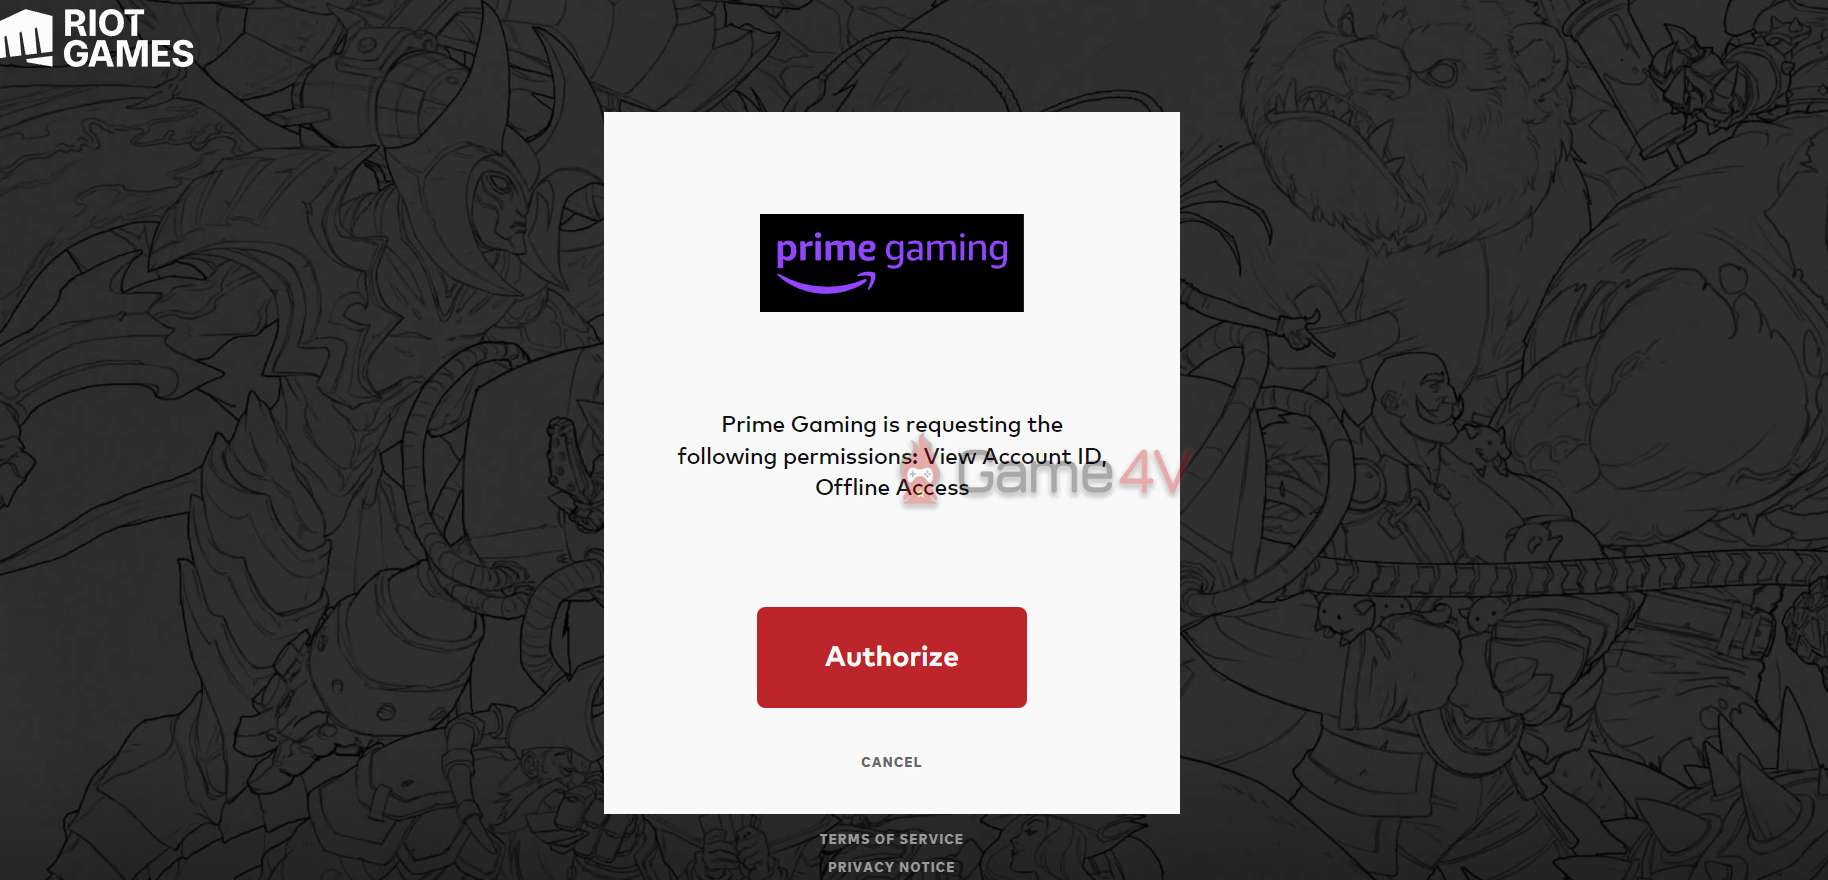 The link will lead to the Riot Games website, log in to your Riot account and press "Authorize".